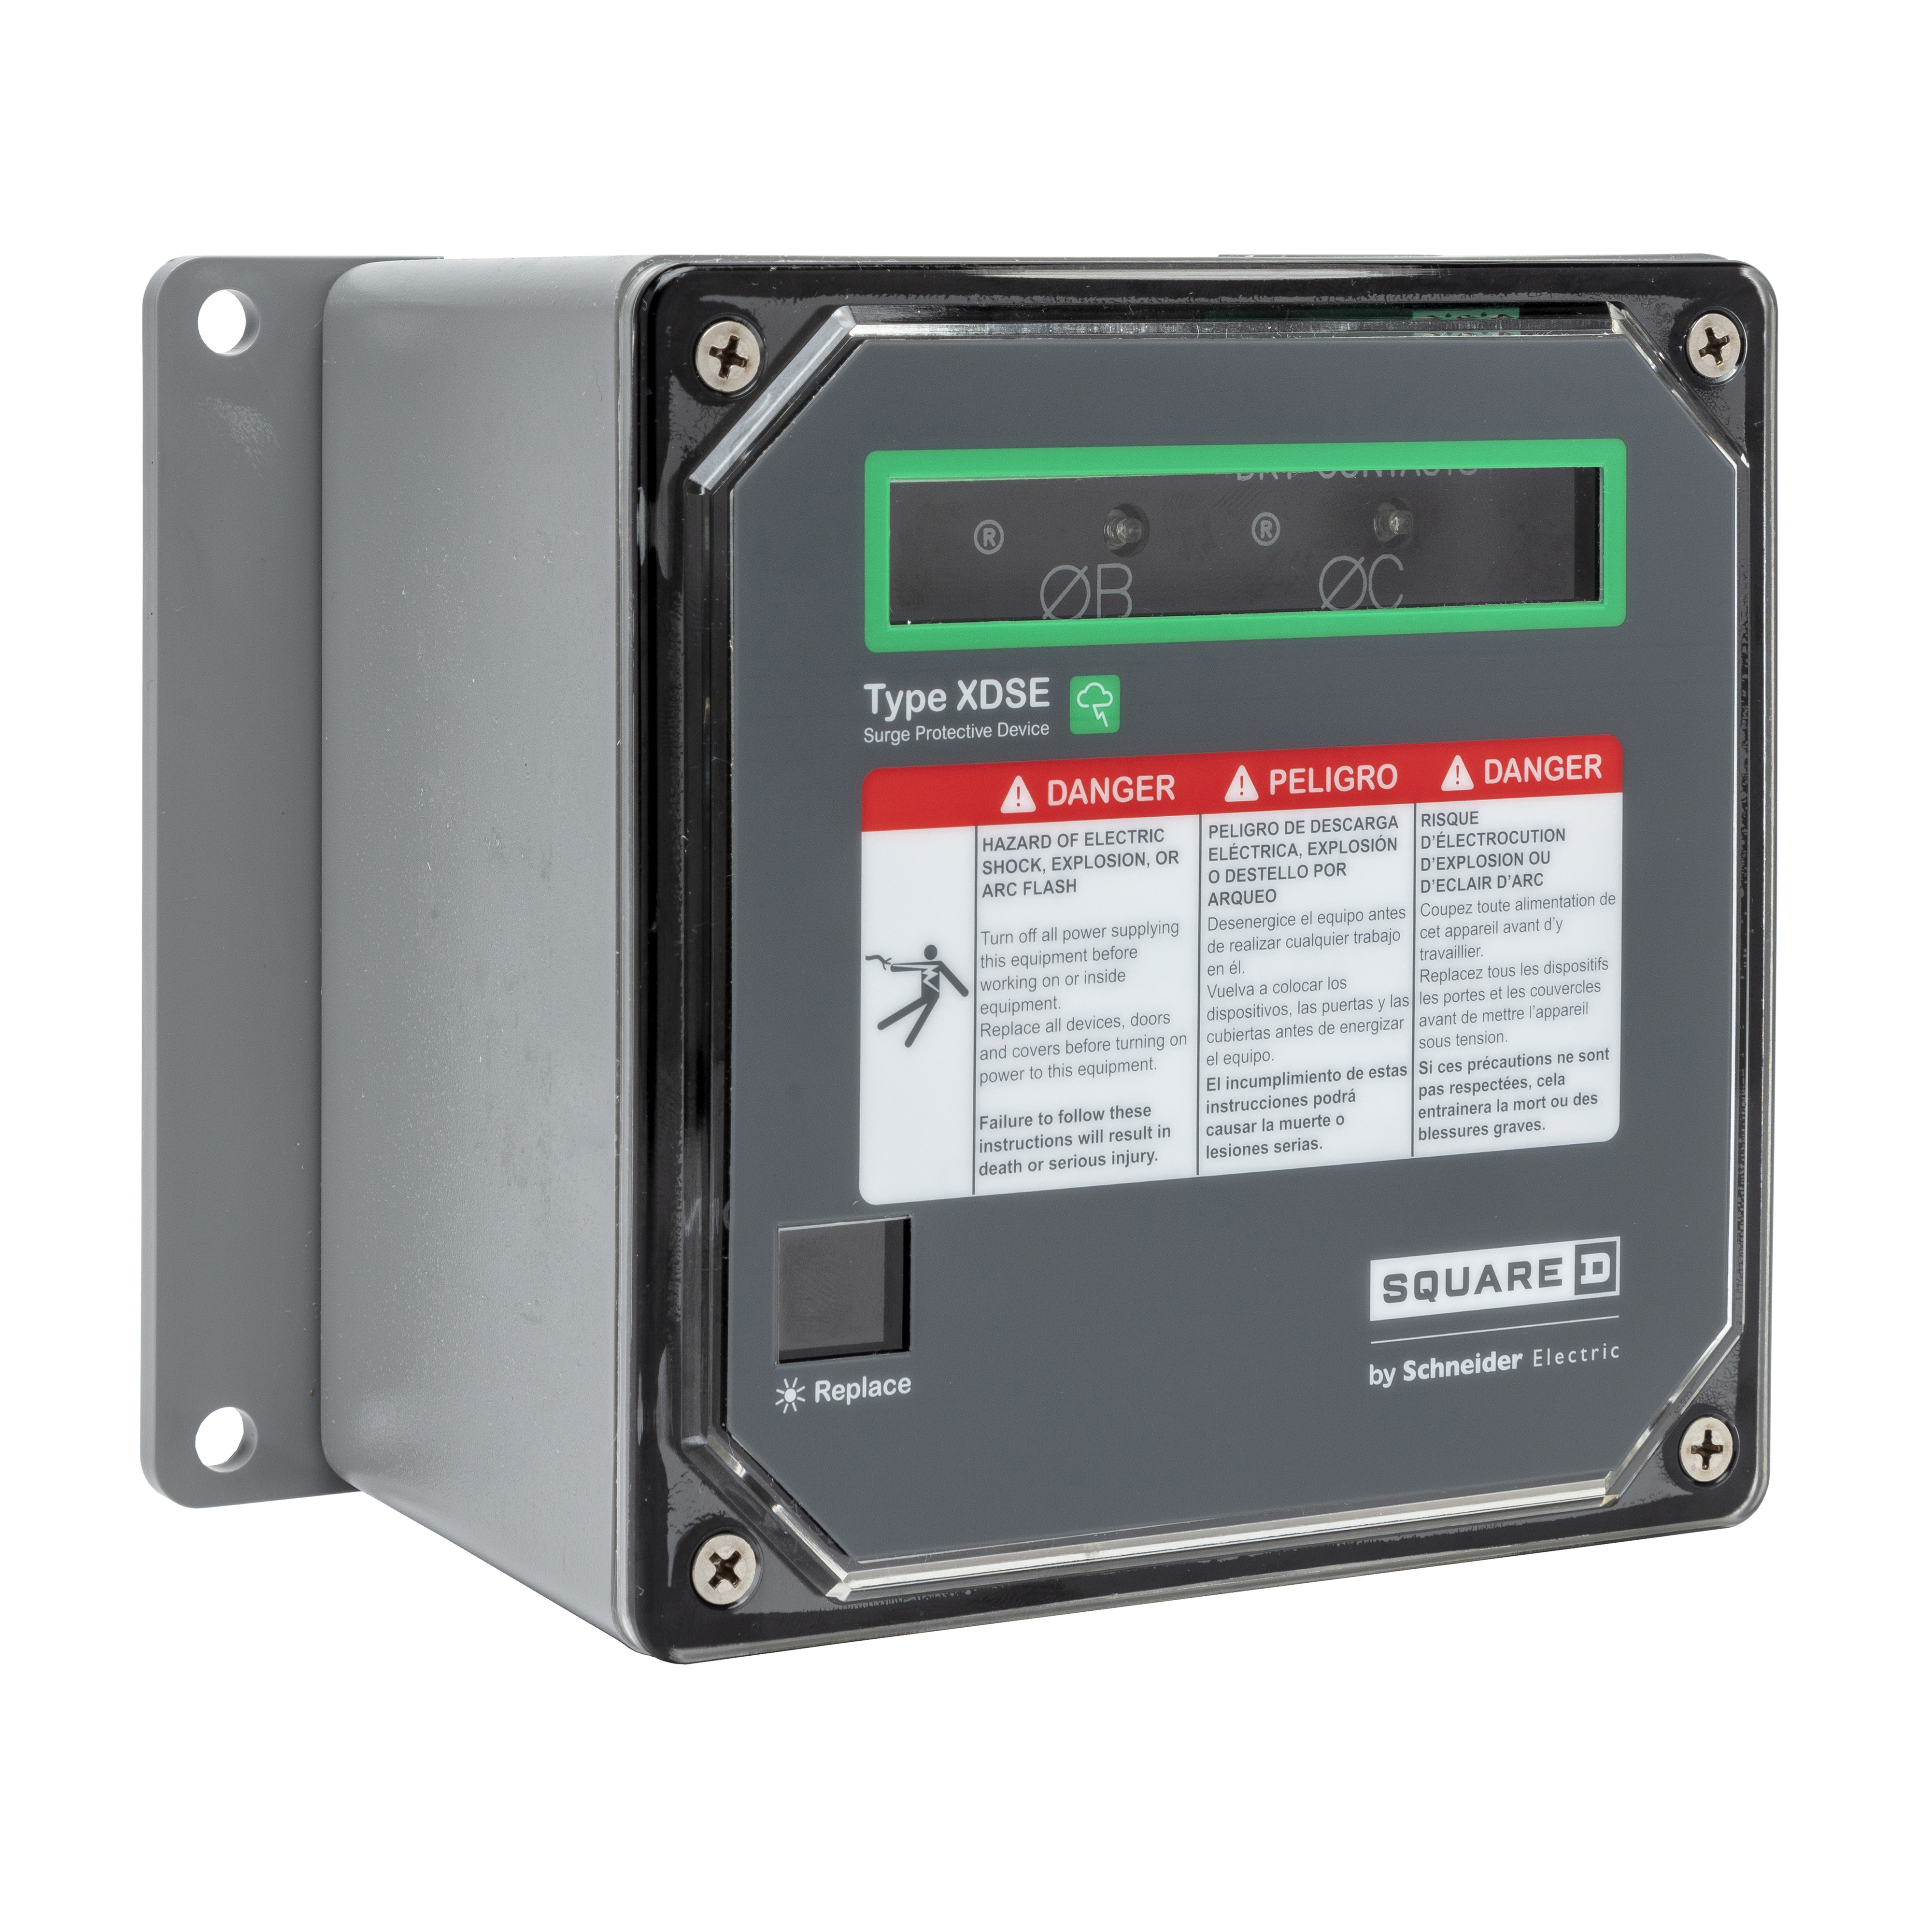 Surge protection device, XDSE, 200kA, 240/120 VAC HLD, 3 phase, 4 wire, SPD type 2